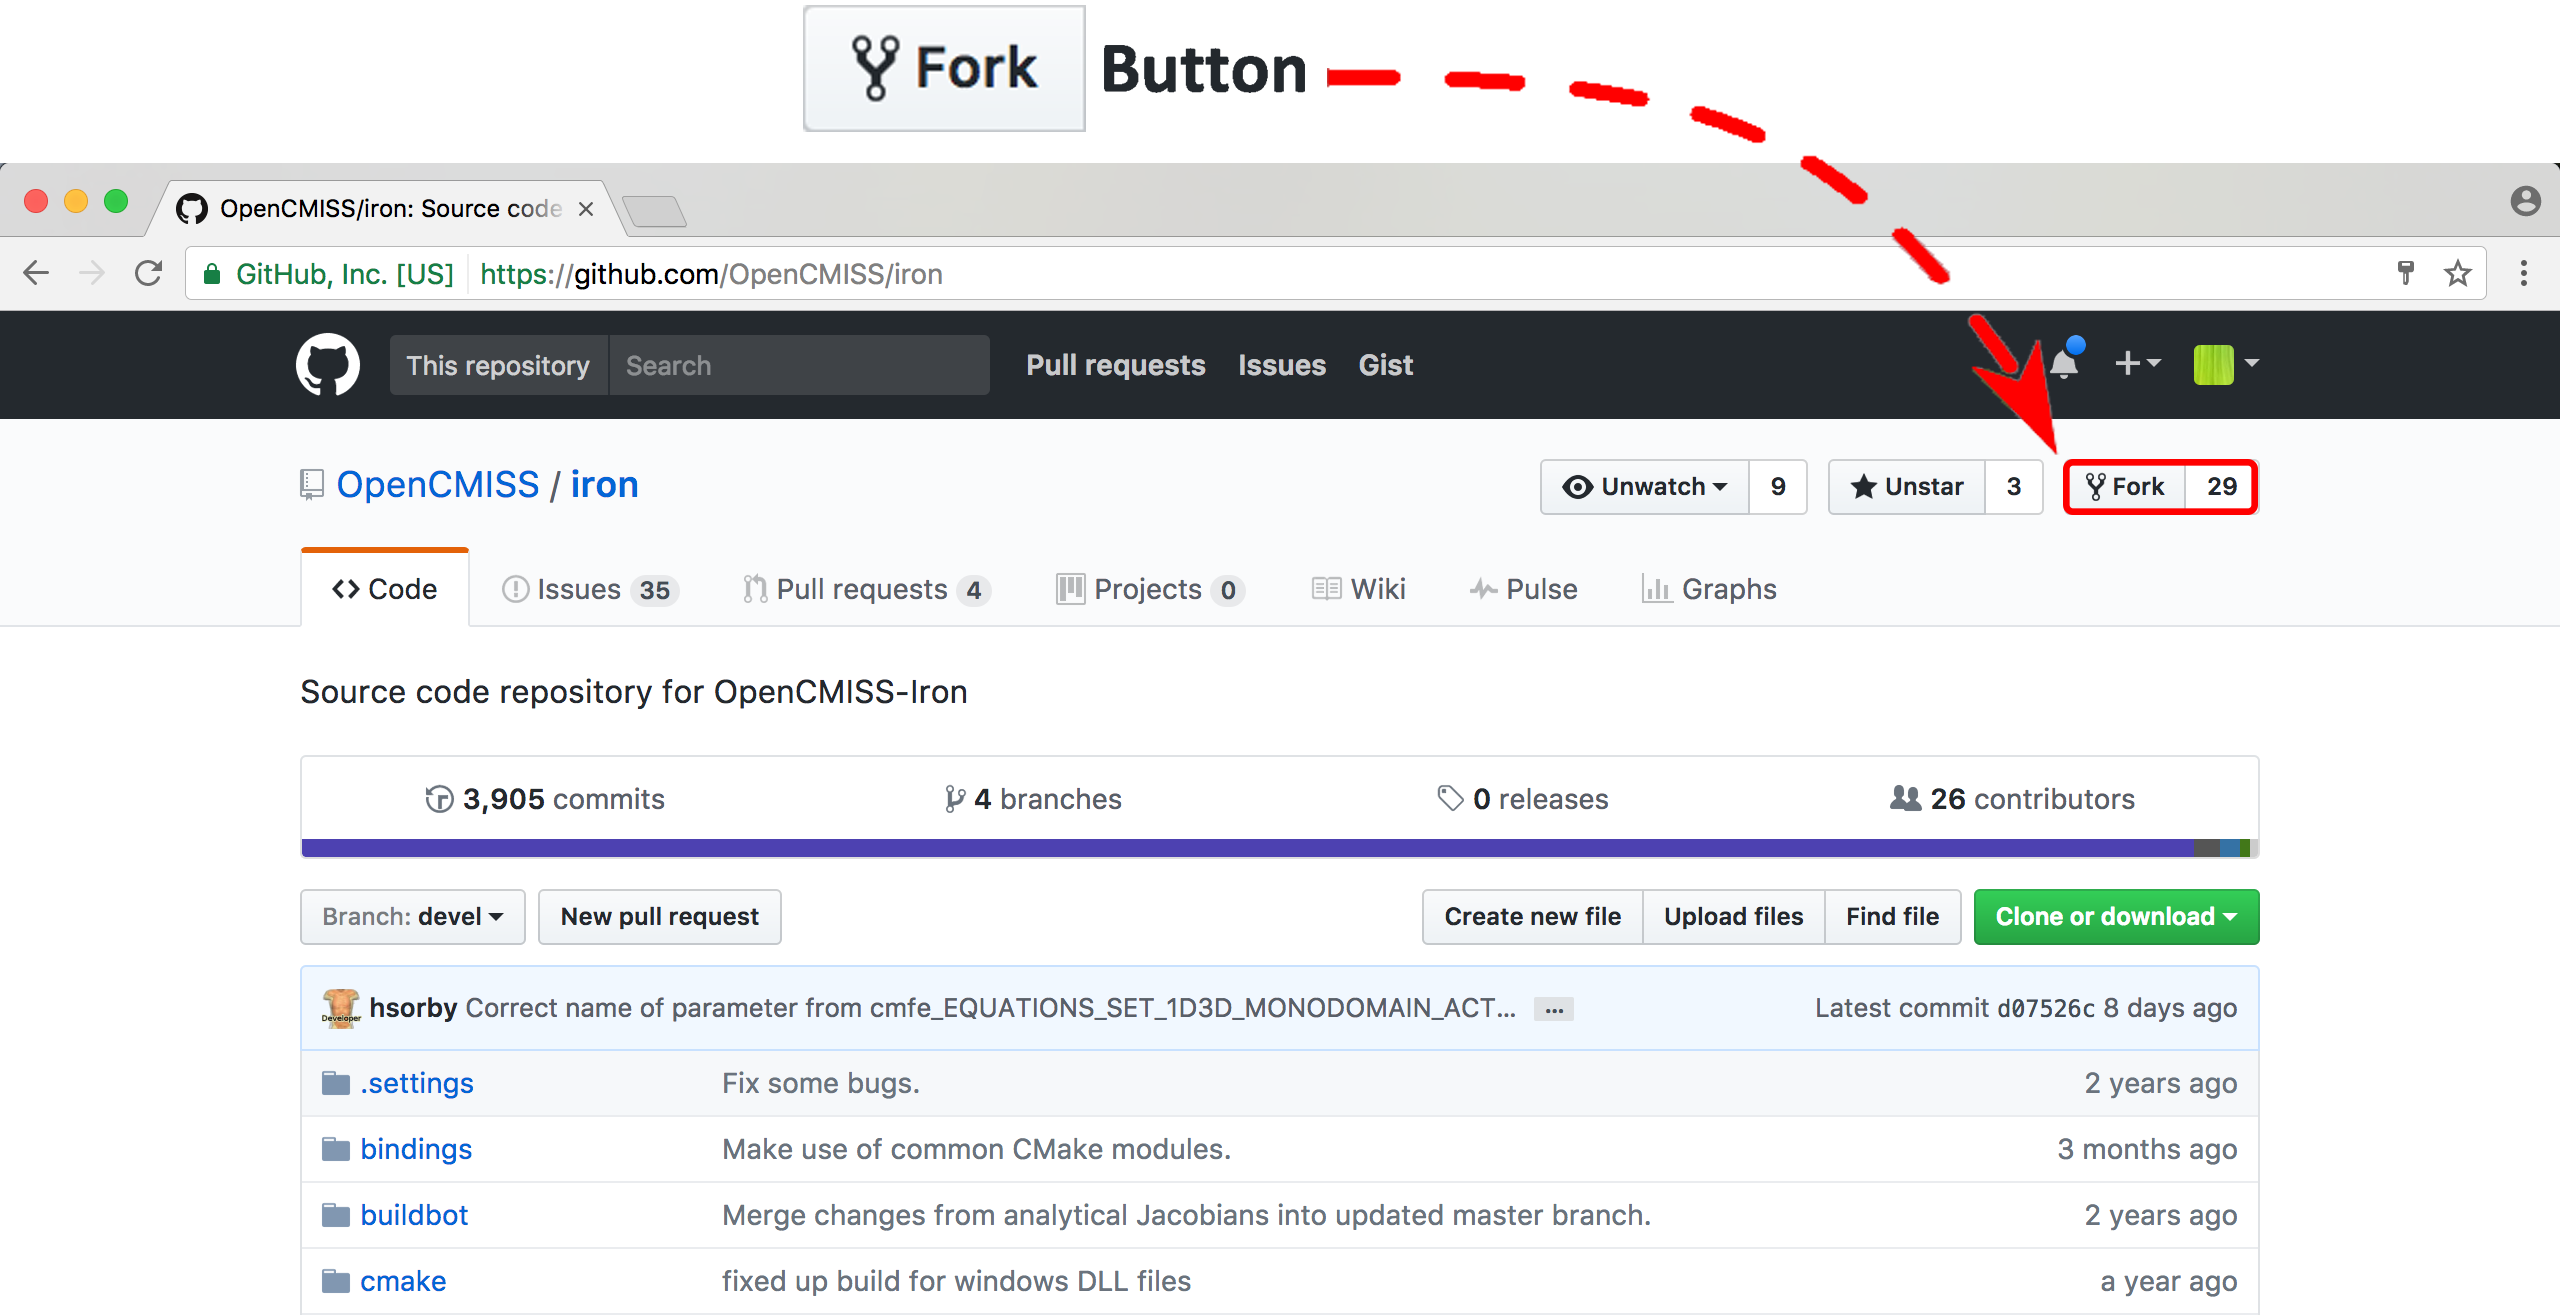 Fork button of the OpenCMISS iron repository